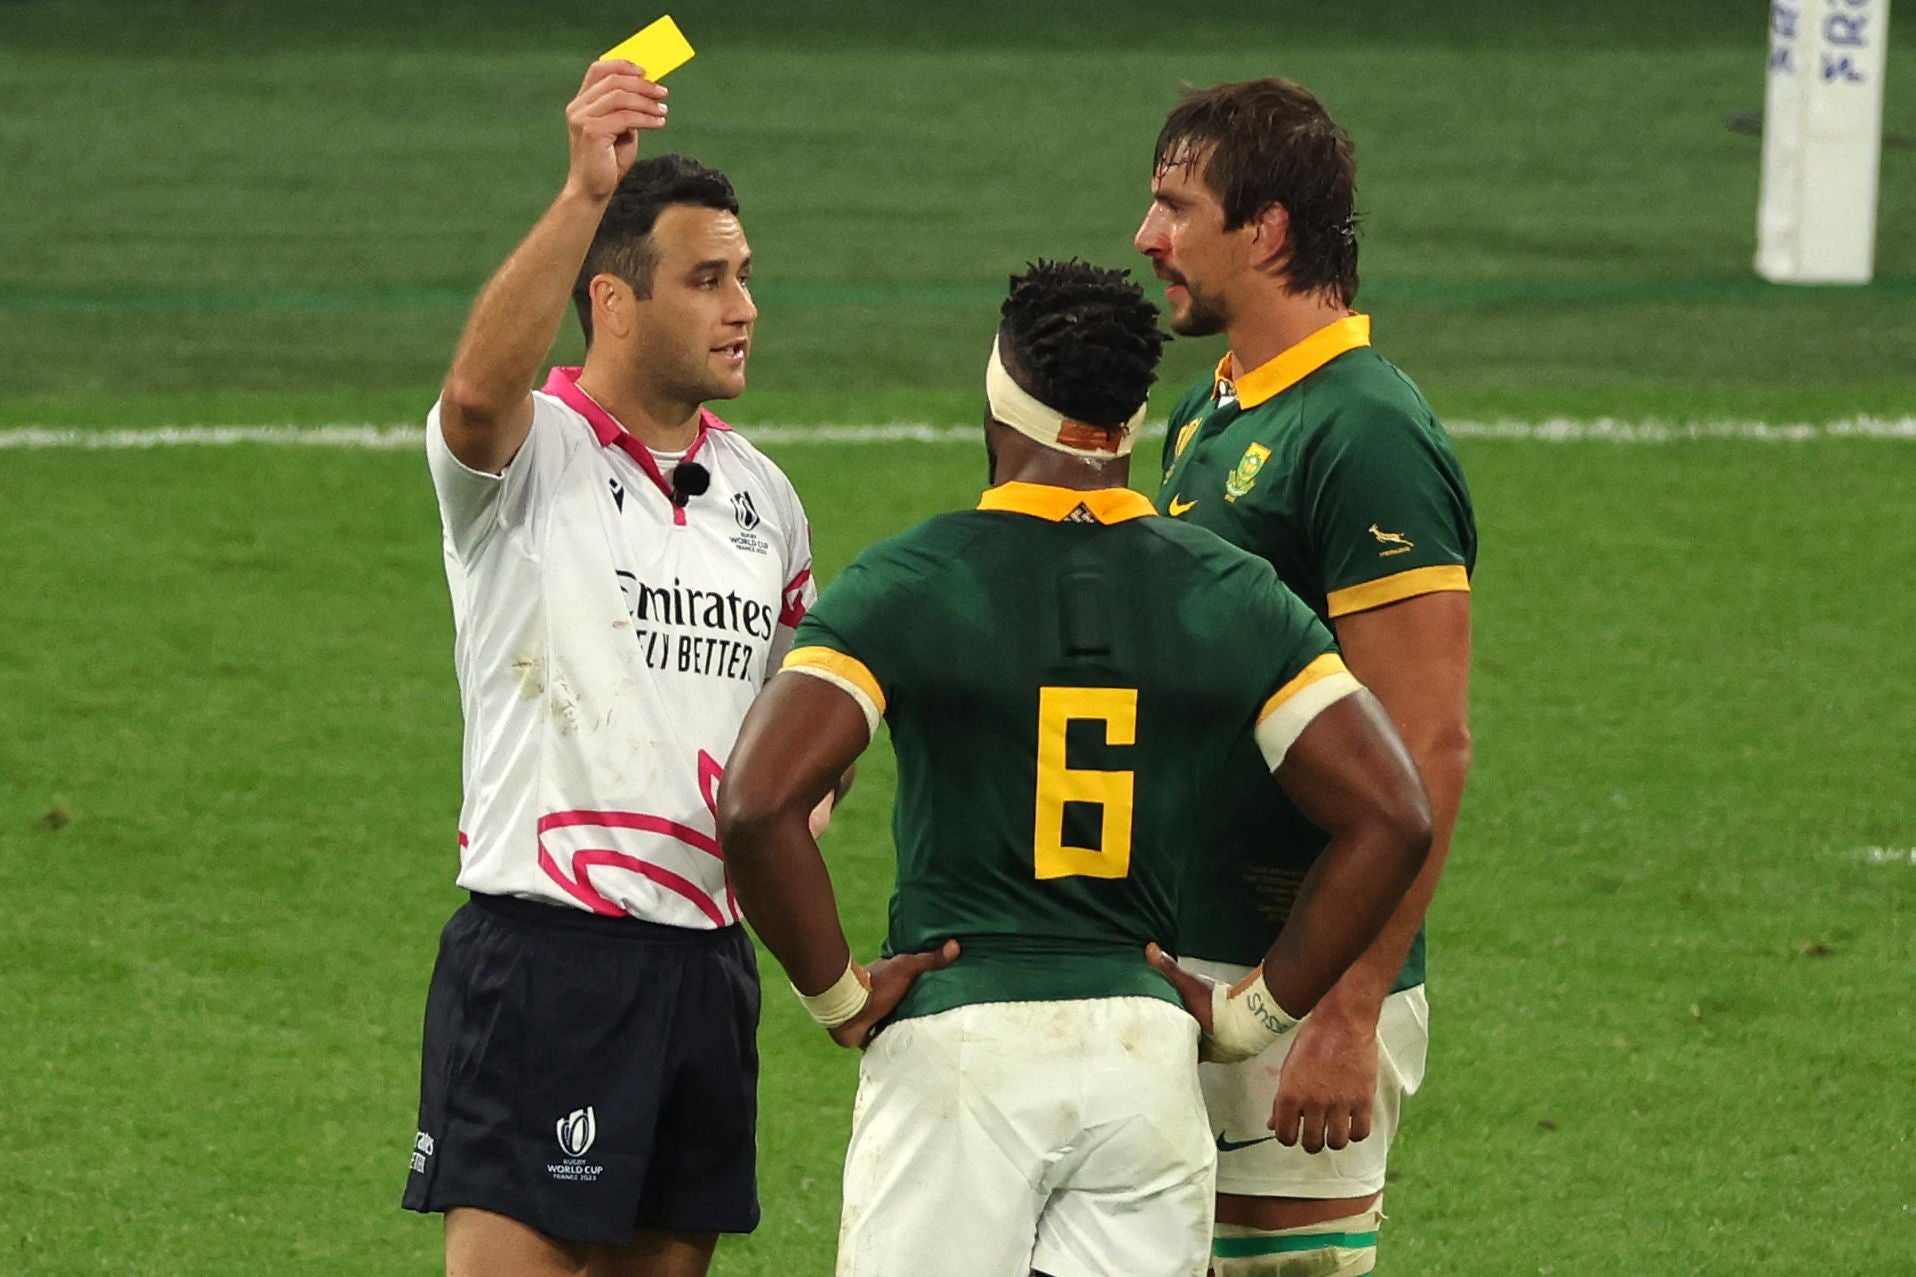 Etzebeth was yellow-carded for a high hit on Uini Atonio